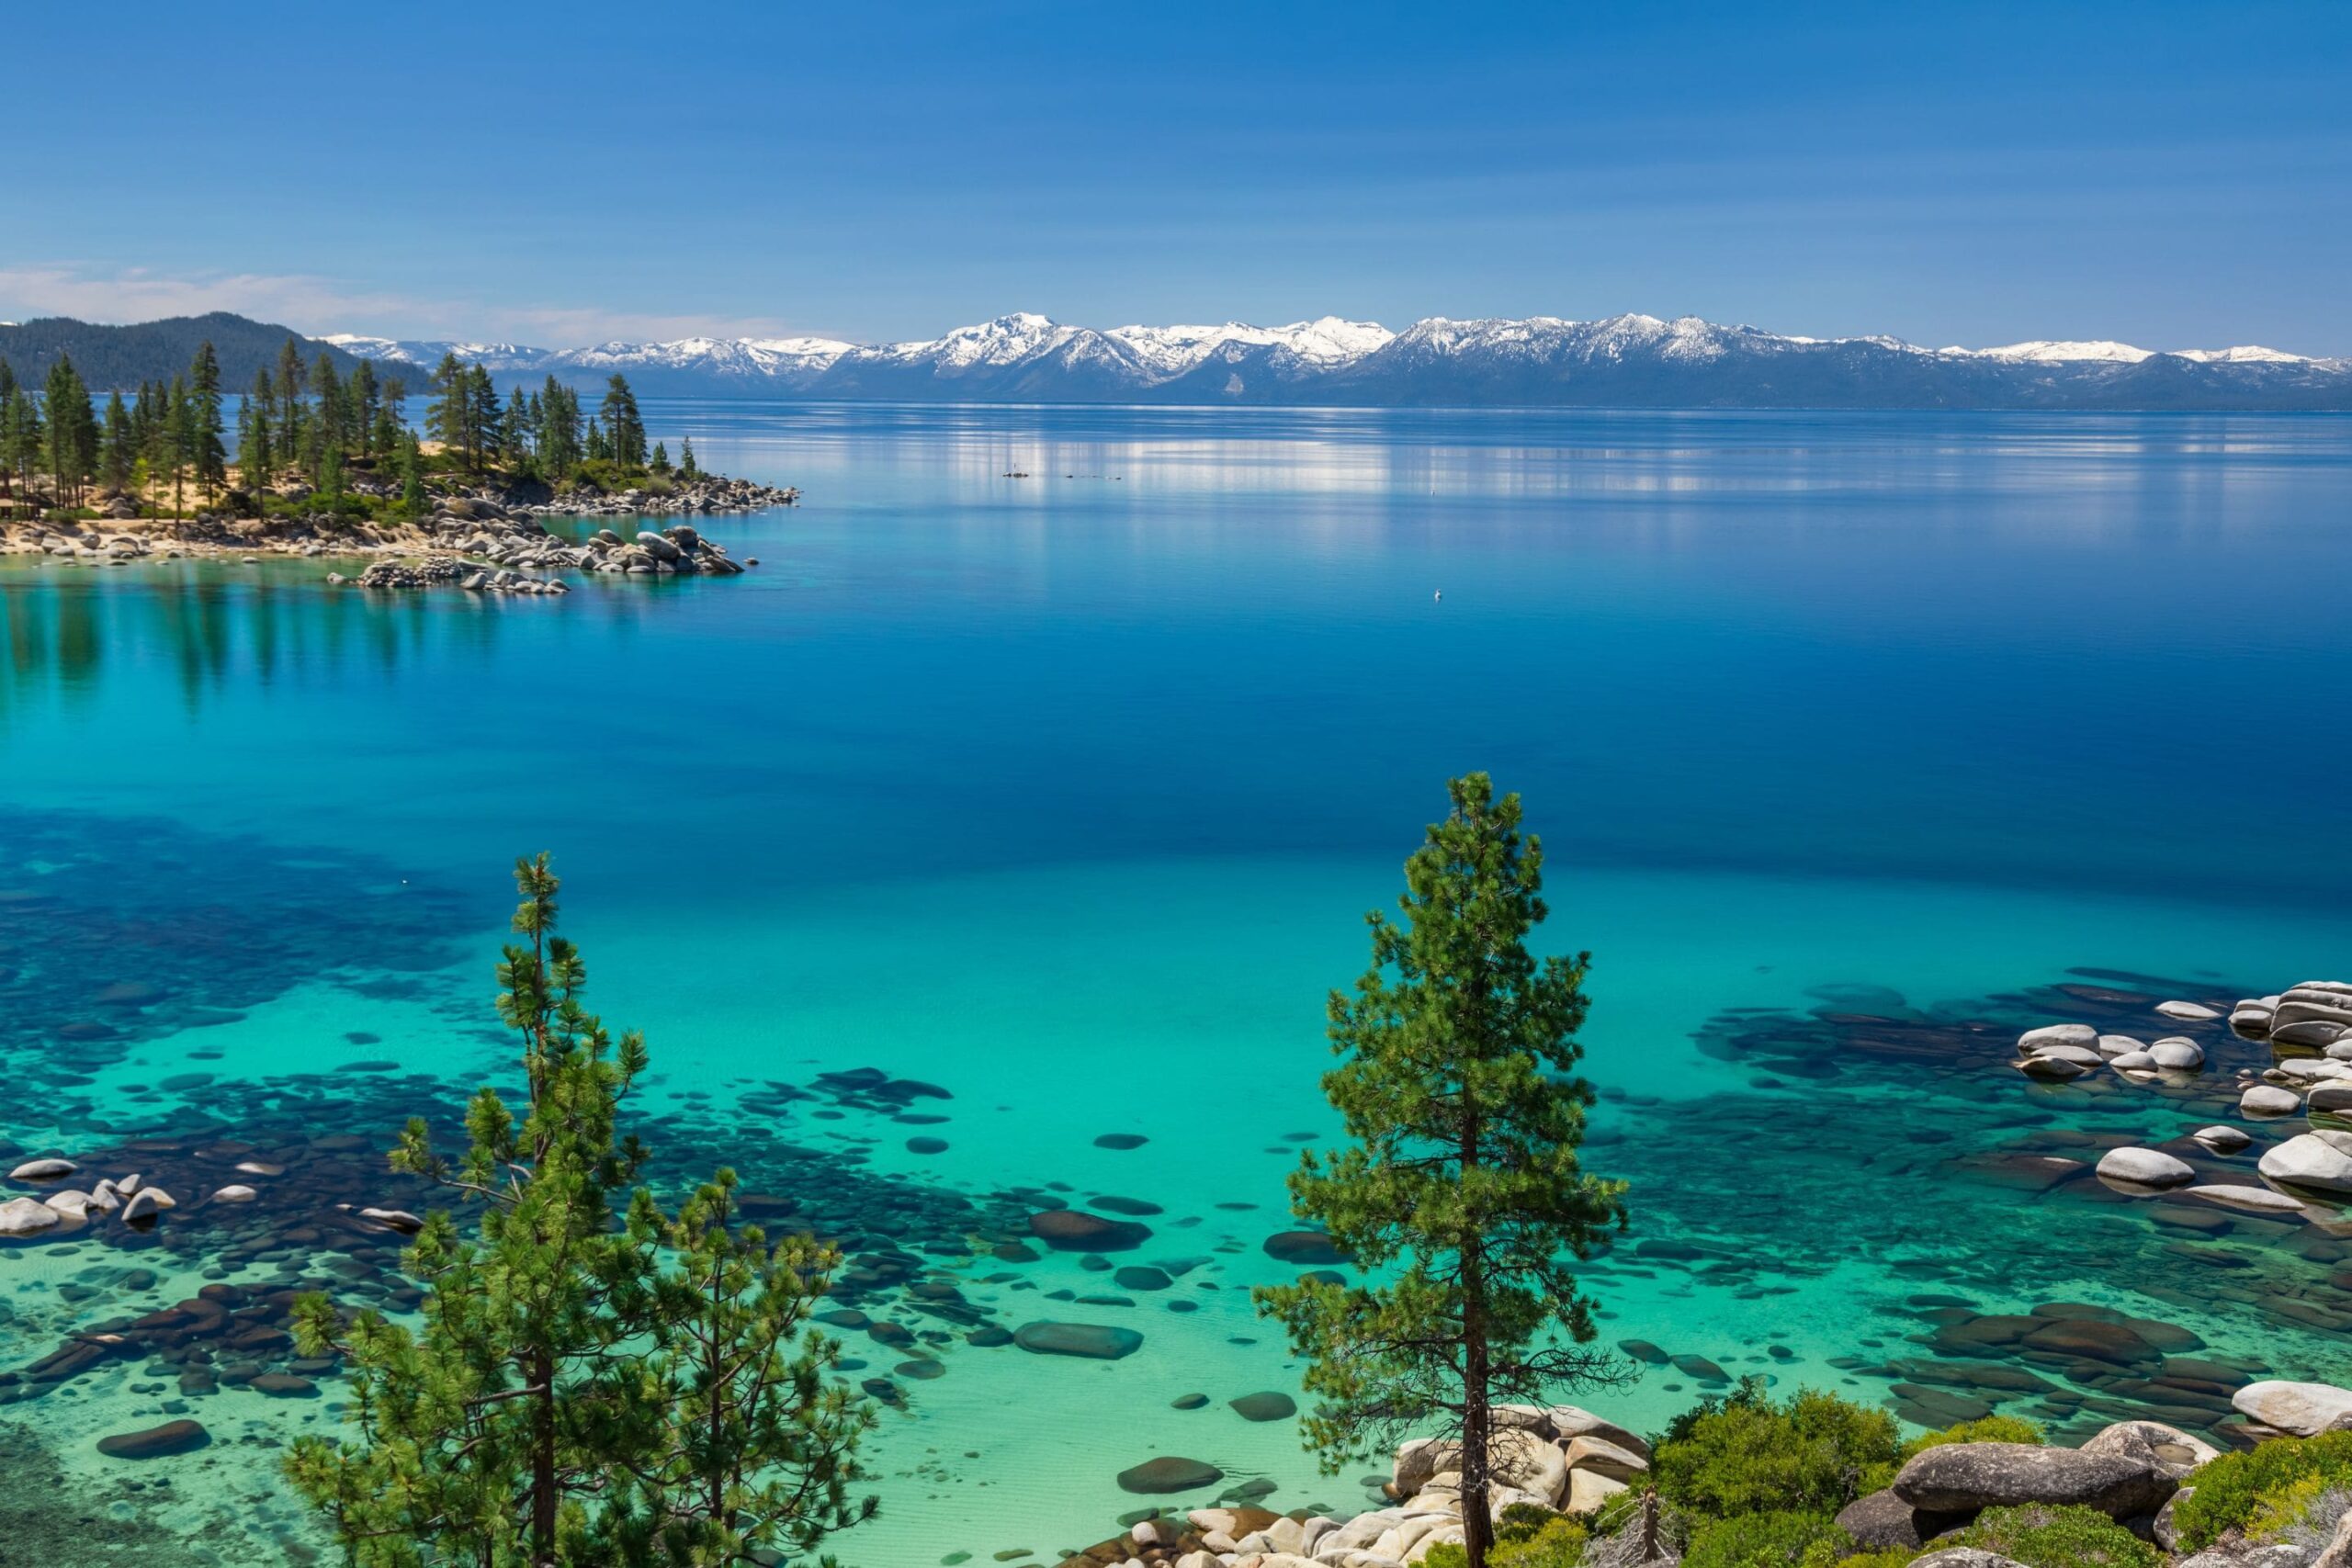 blue green Lake Tahoe with evergreen trees in the foreground and snowy mountains in the background